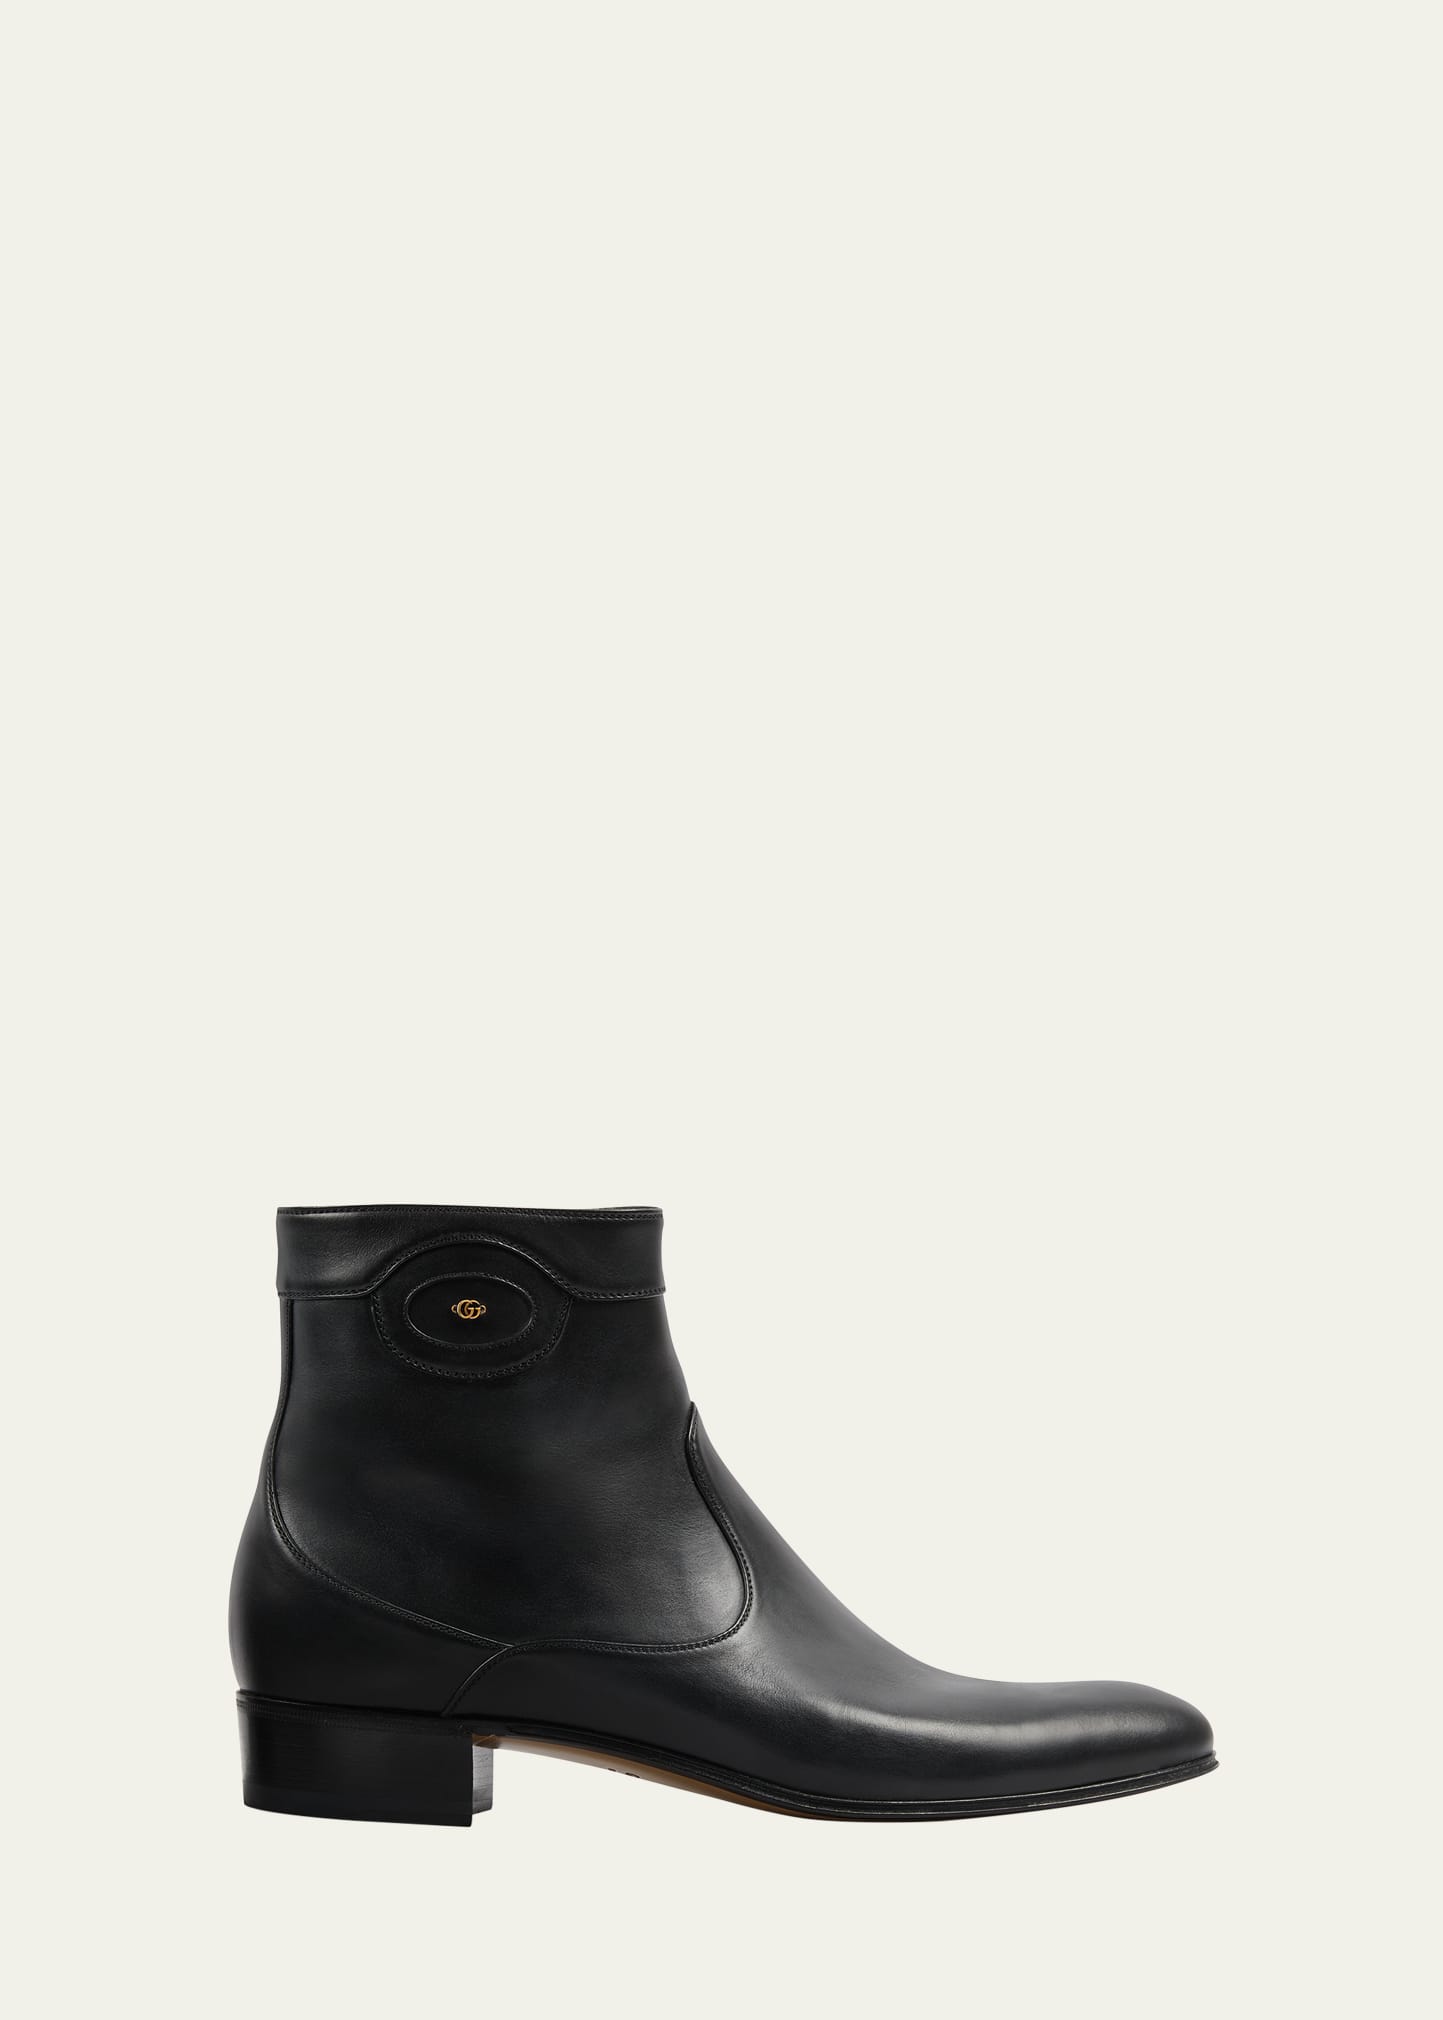 Men's Adel GG Leather Ankle Boots